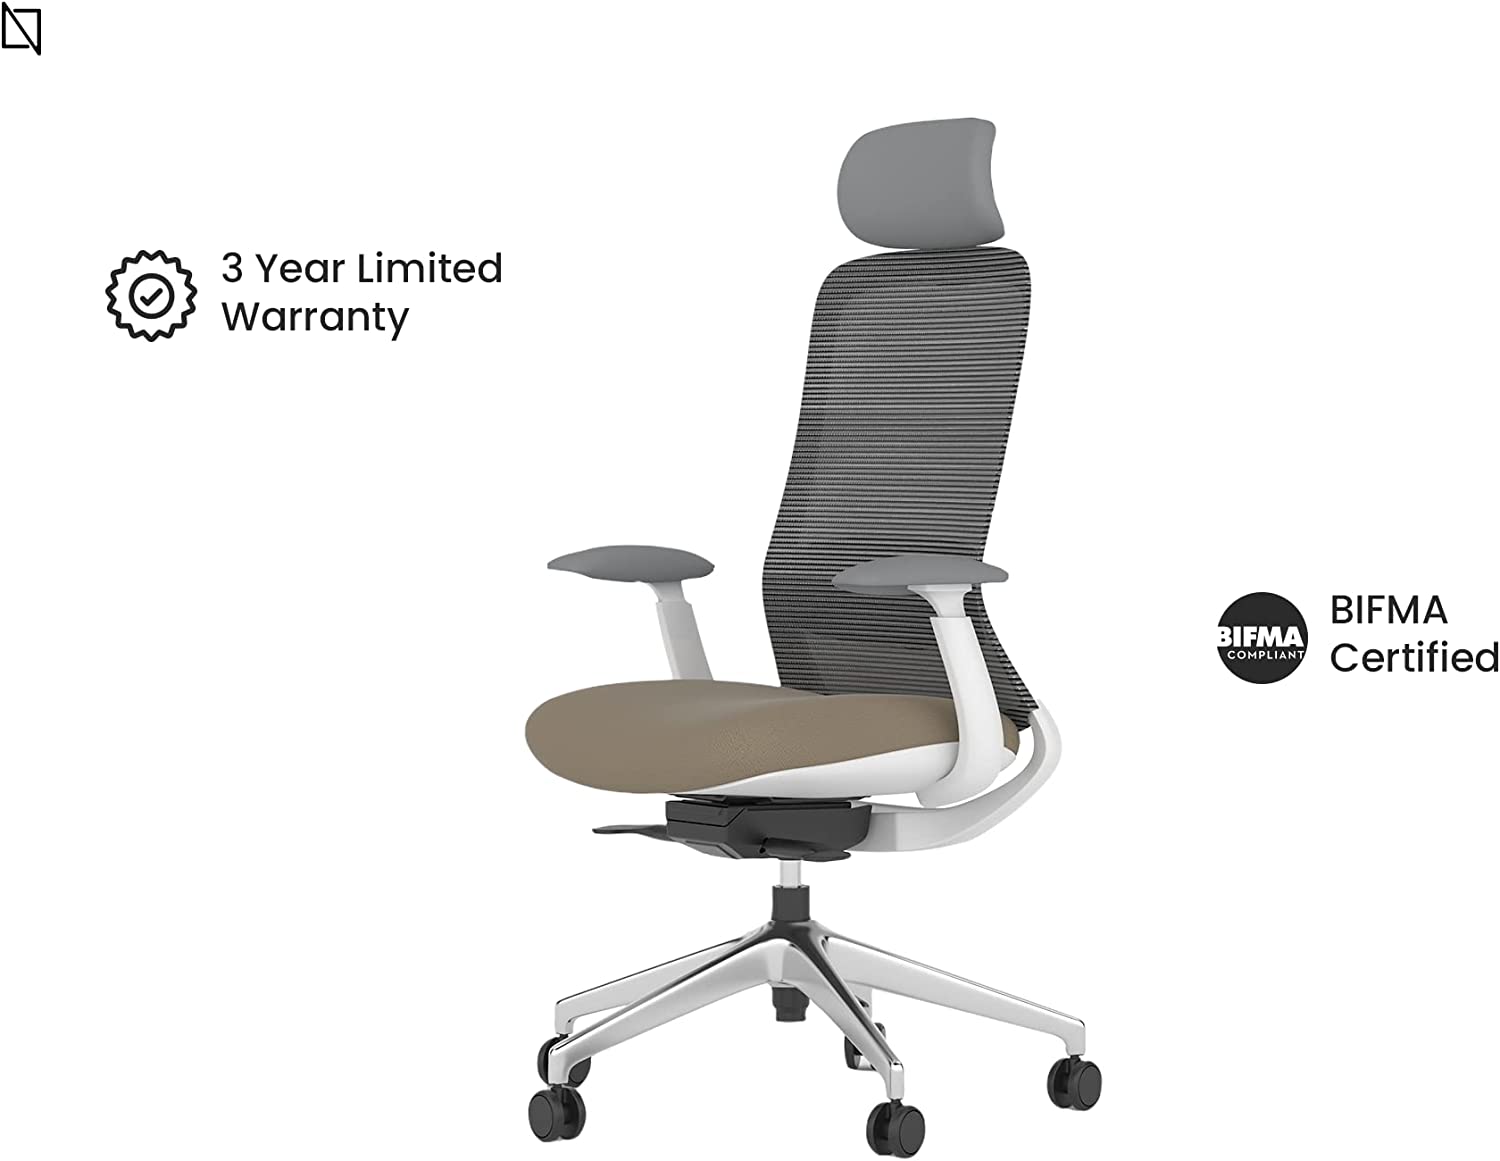 NIO Chair, Ergonomic Design, Premium Office & Computer Chair with adjustable features by Navodesk Dubai